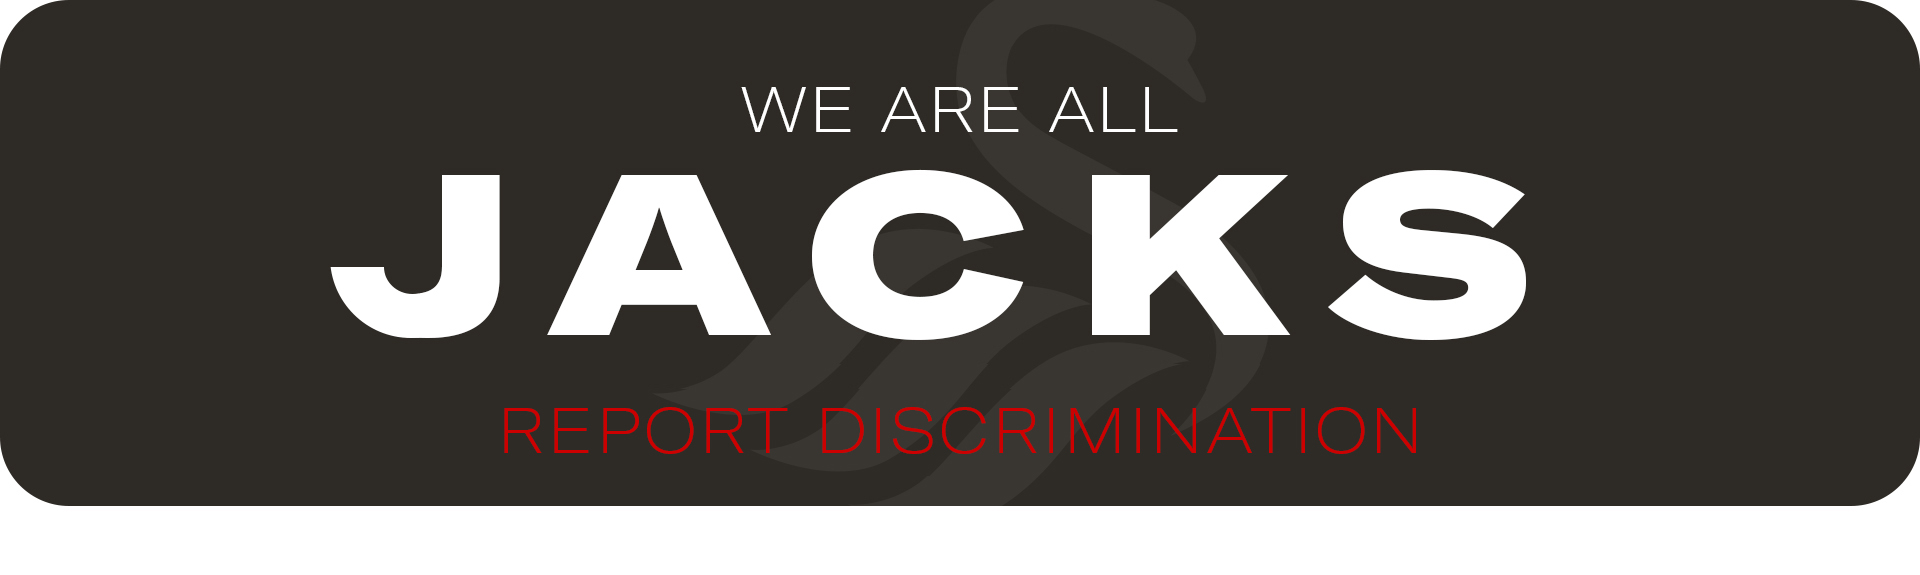 We are all Jack - Report Discrimination 